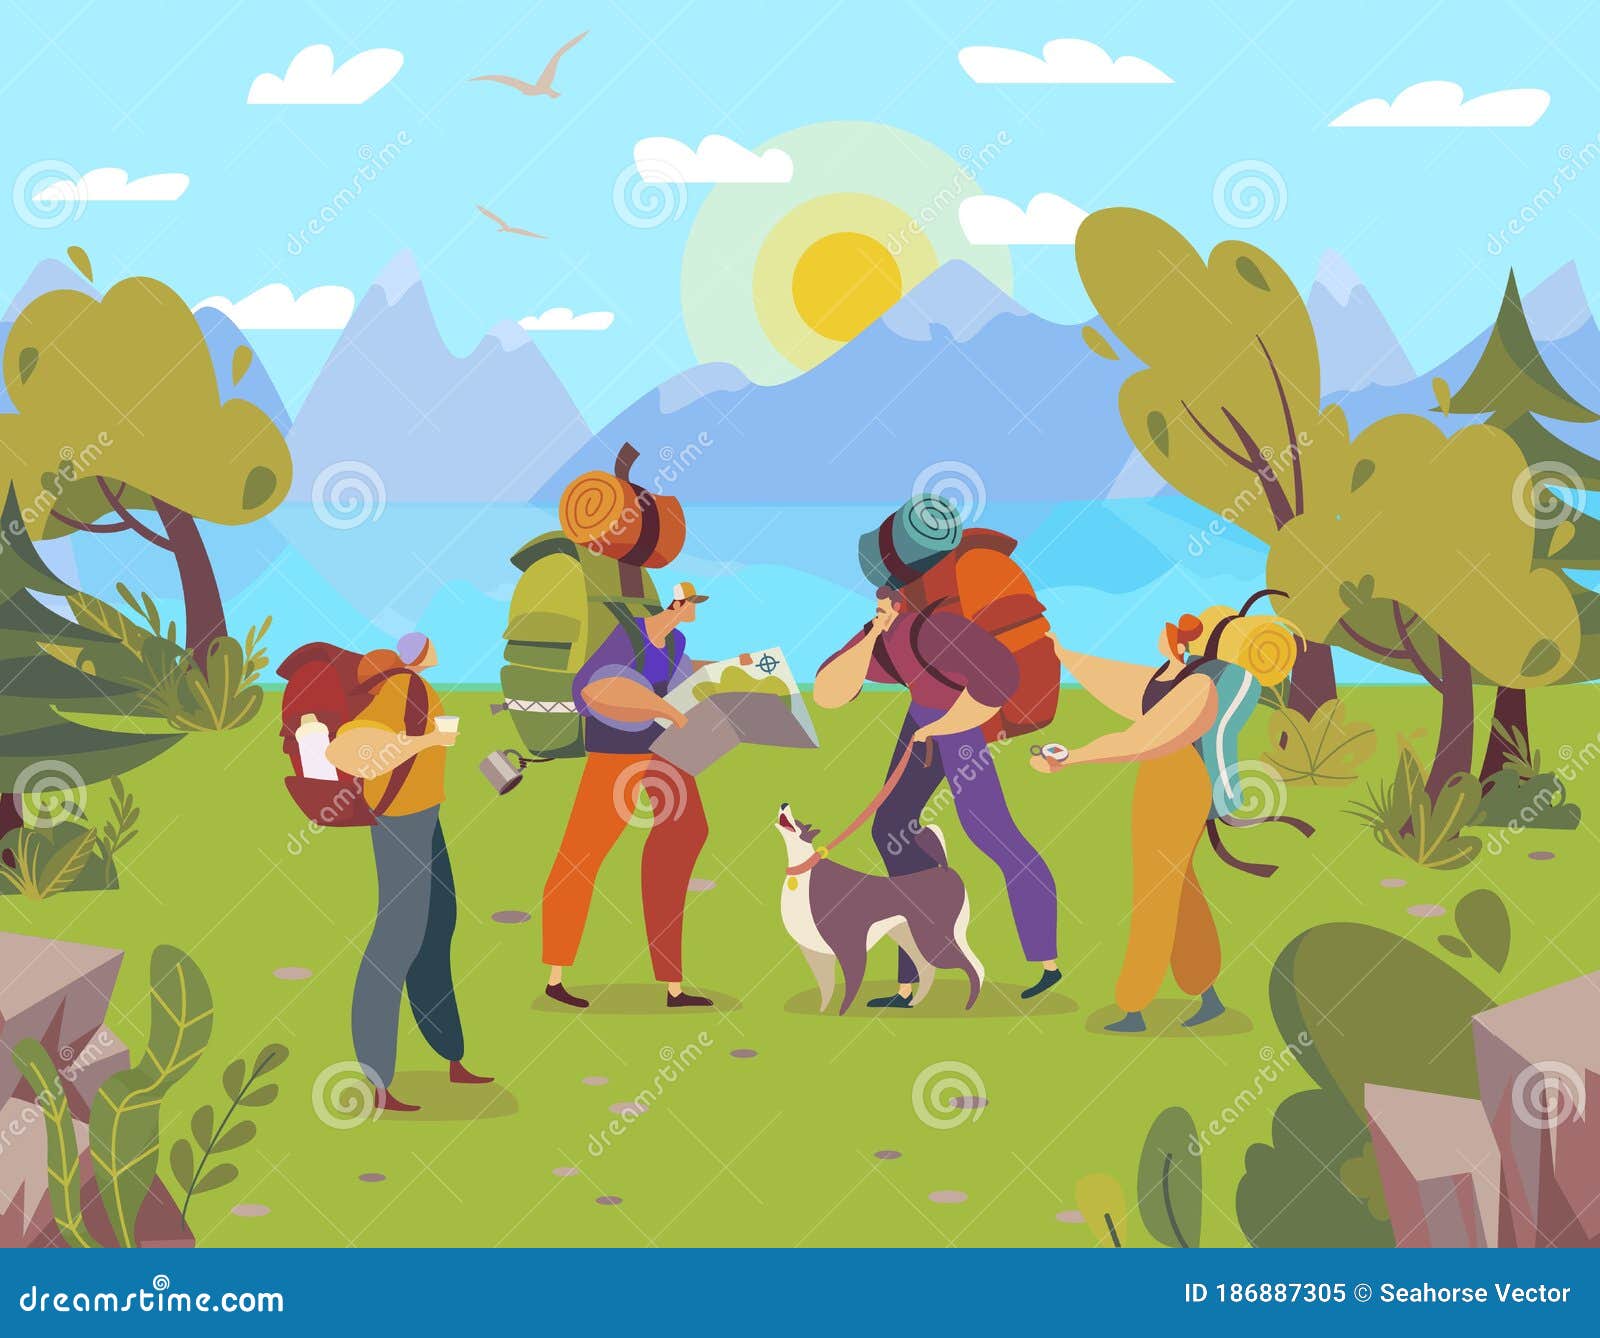 People Hiking With Backpacks Cartoon Characters Trekking In Nature